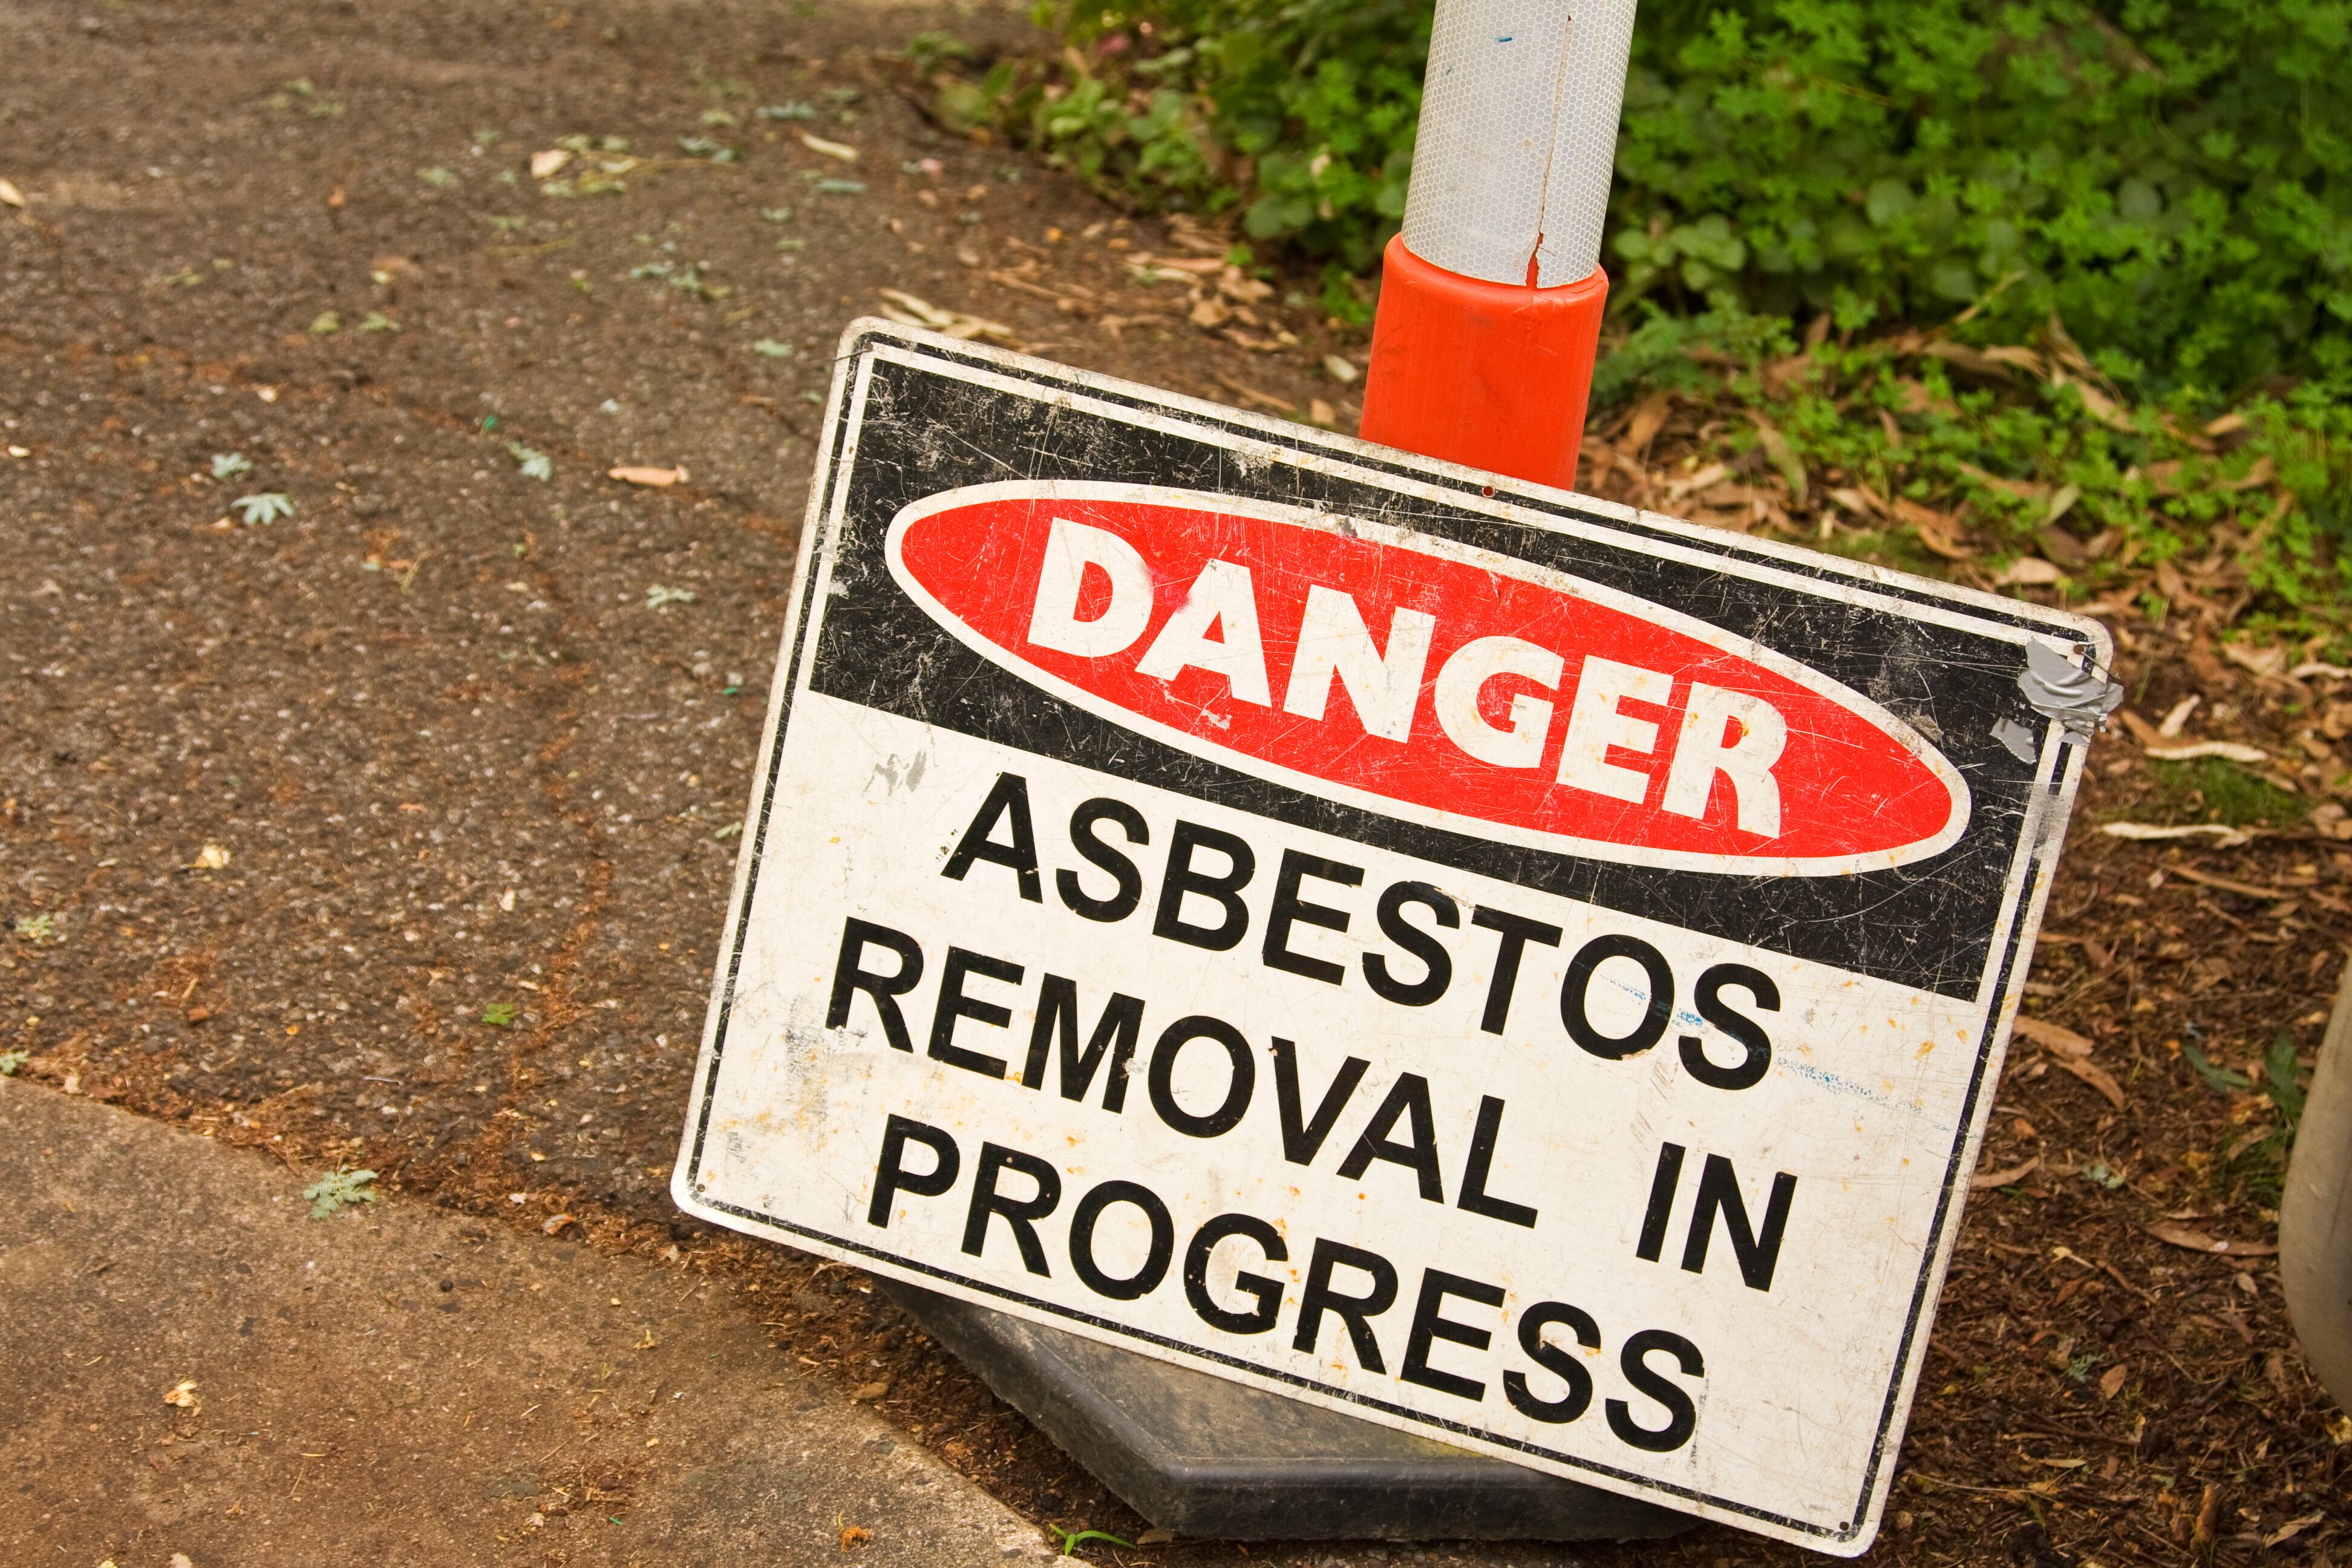 A sign that says “Danger. Asbestos Removal In Progress.”